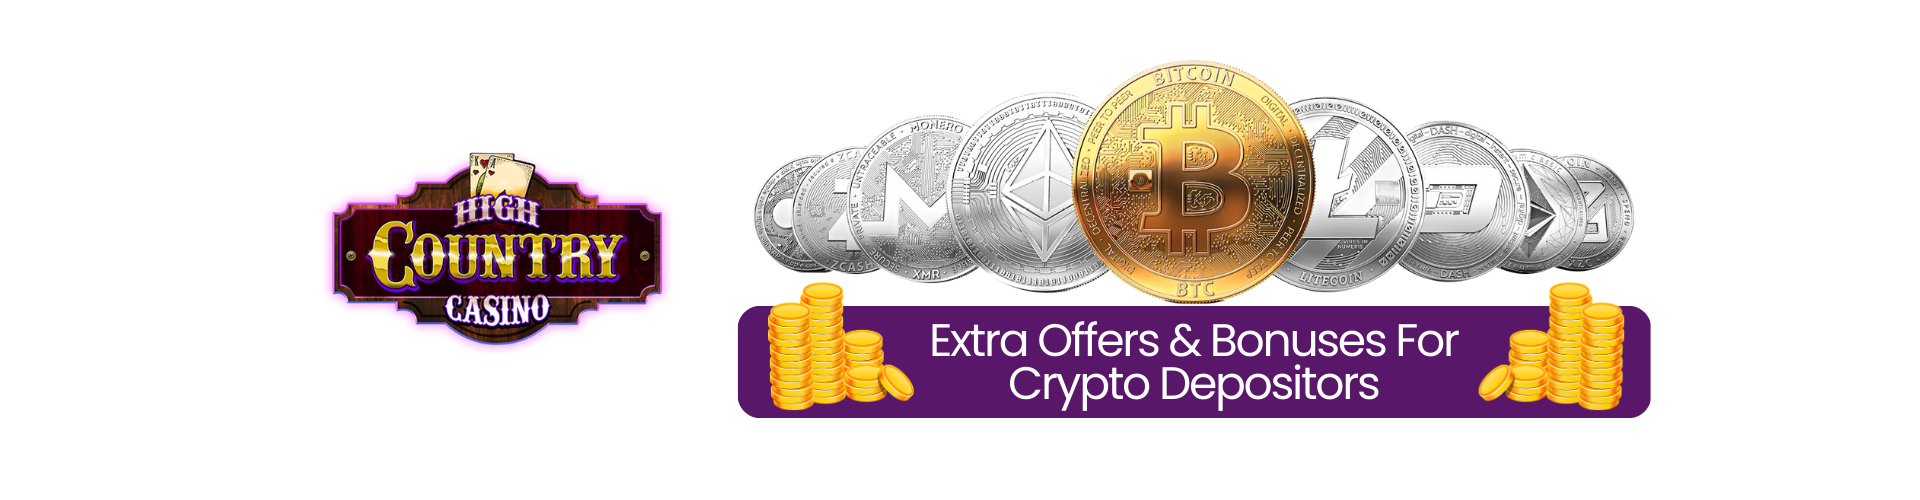 High Country Casino - Extra Offers & Bonuses For Crypto Depositors